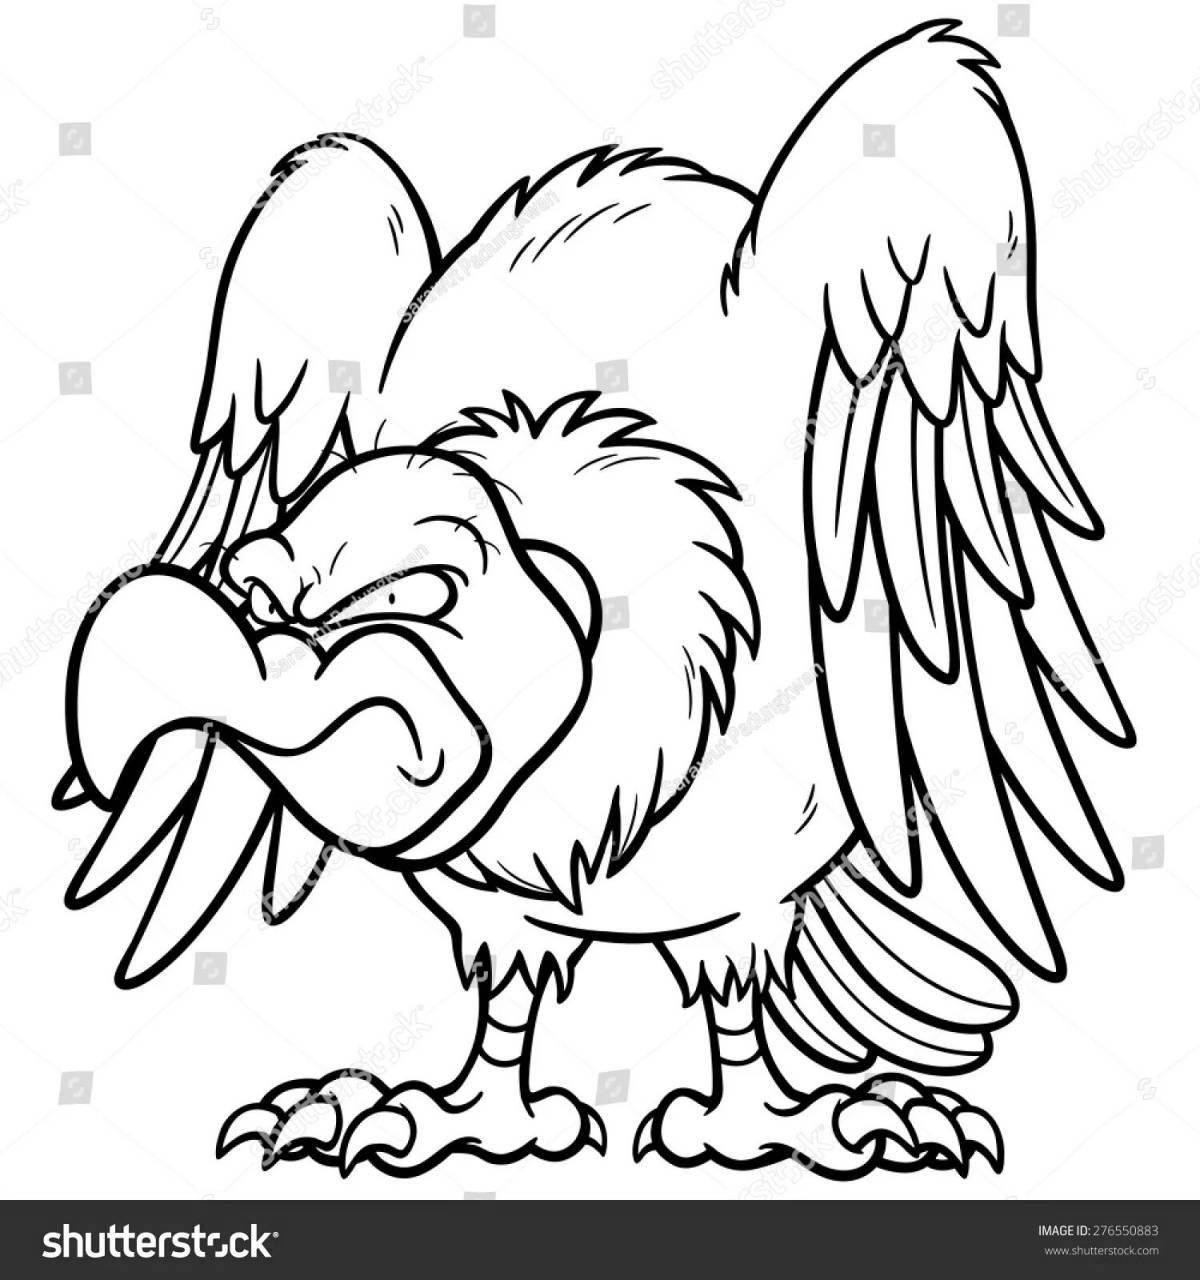 Coloring page dazzling vulture